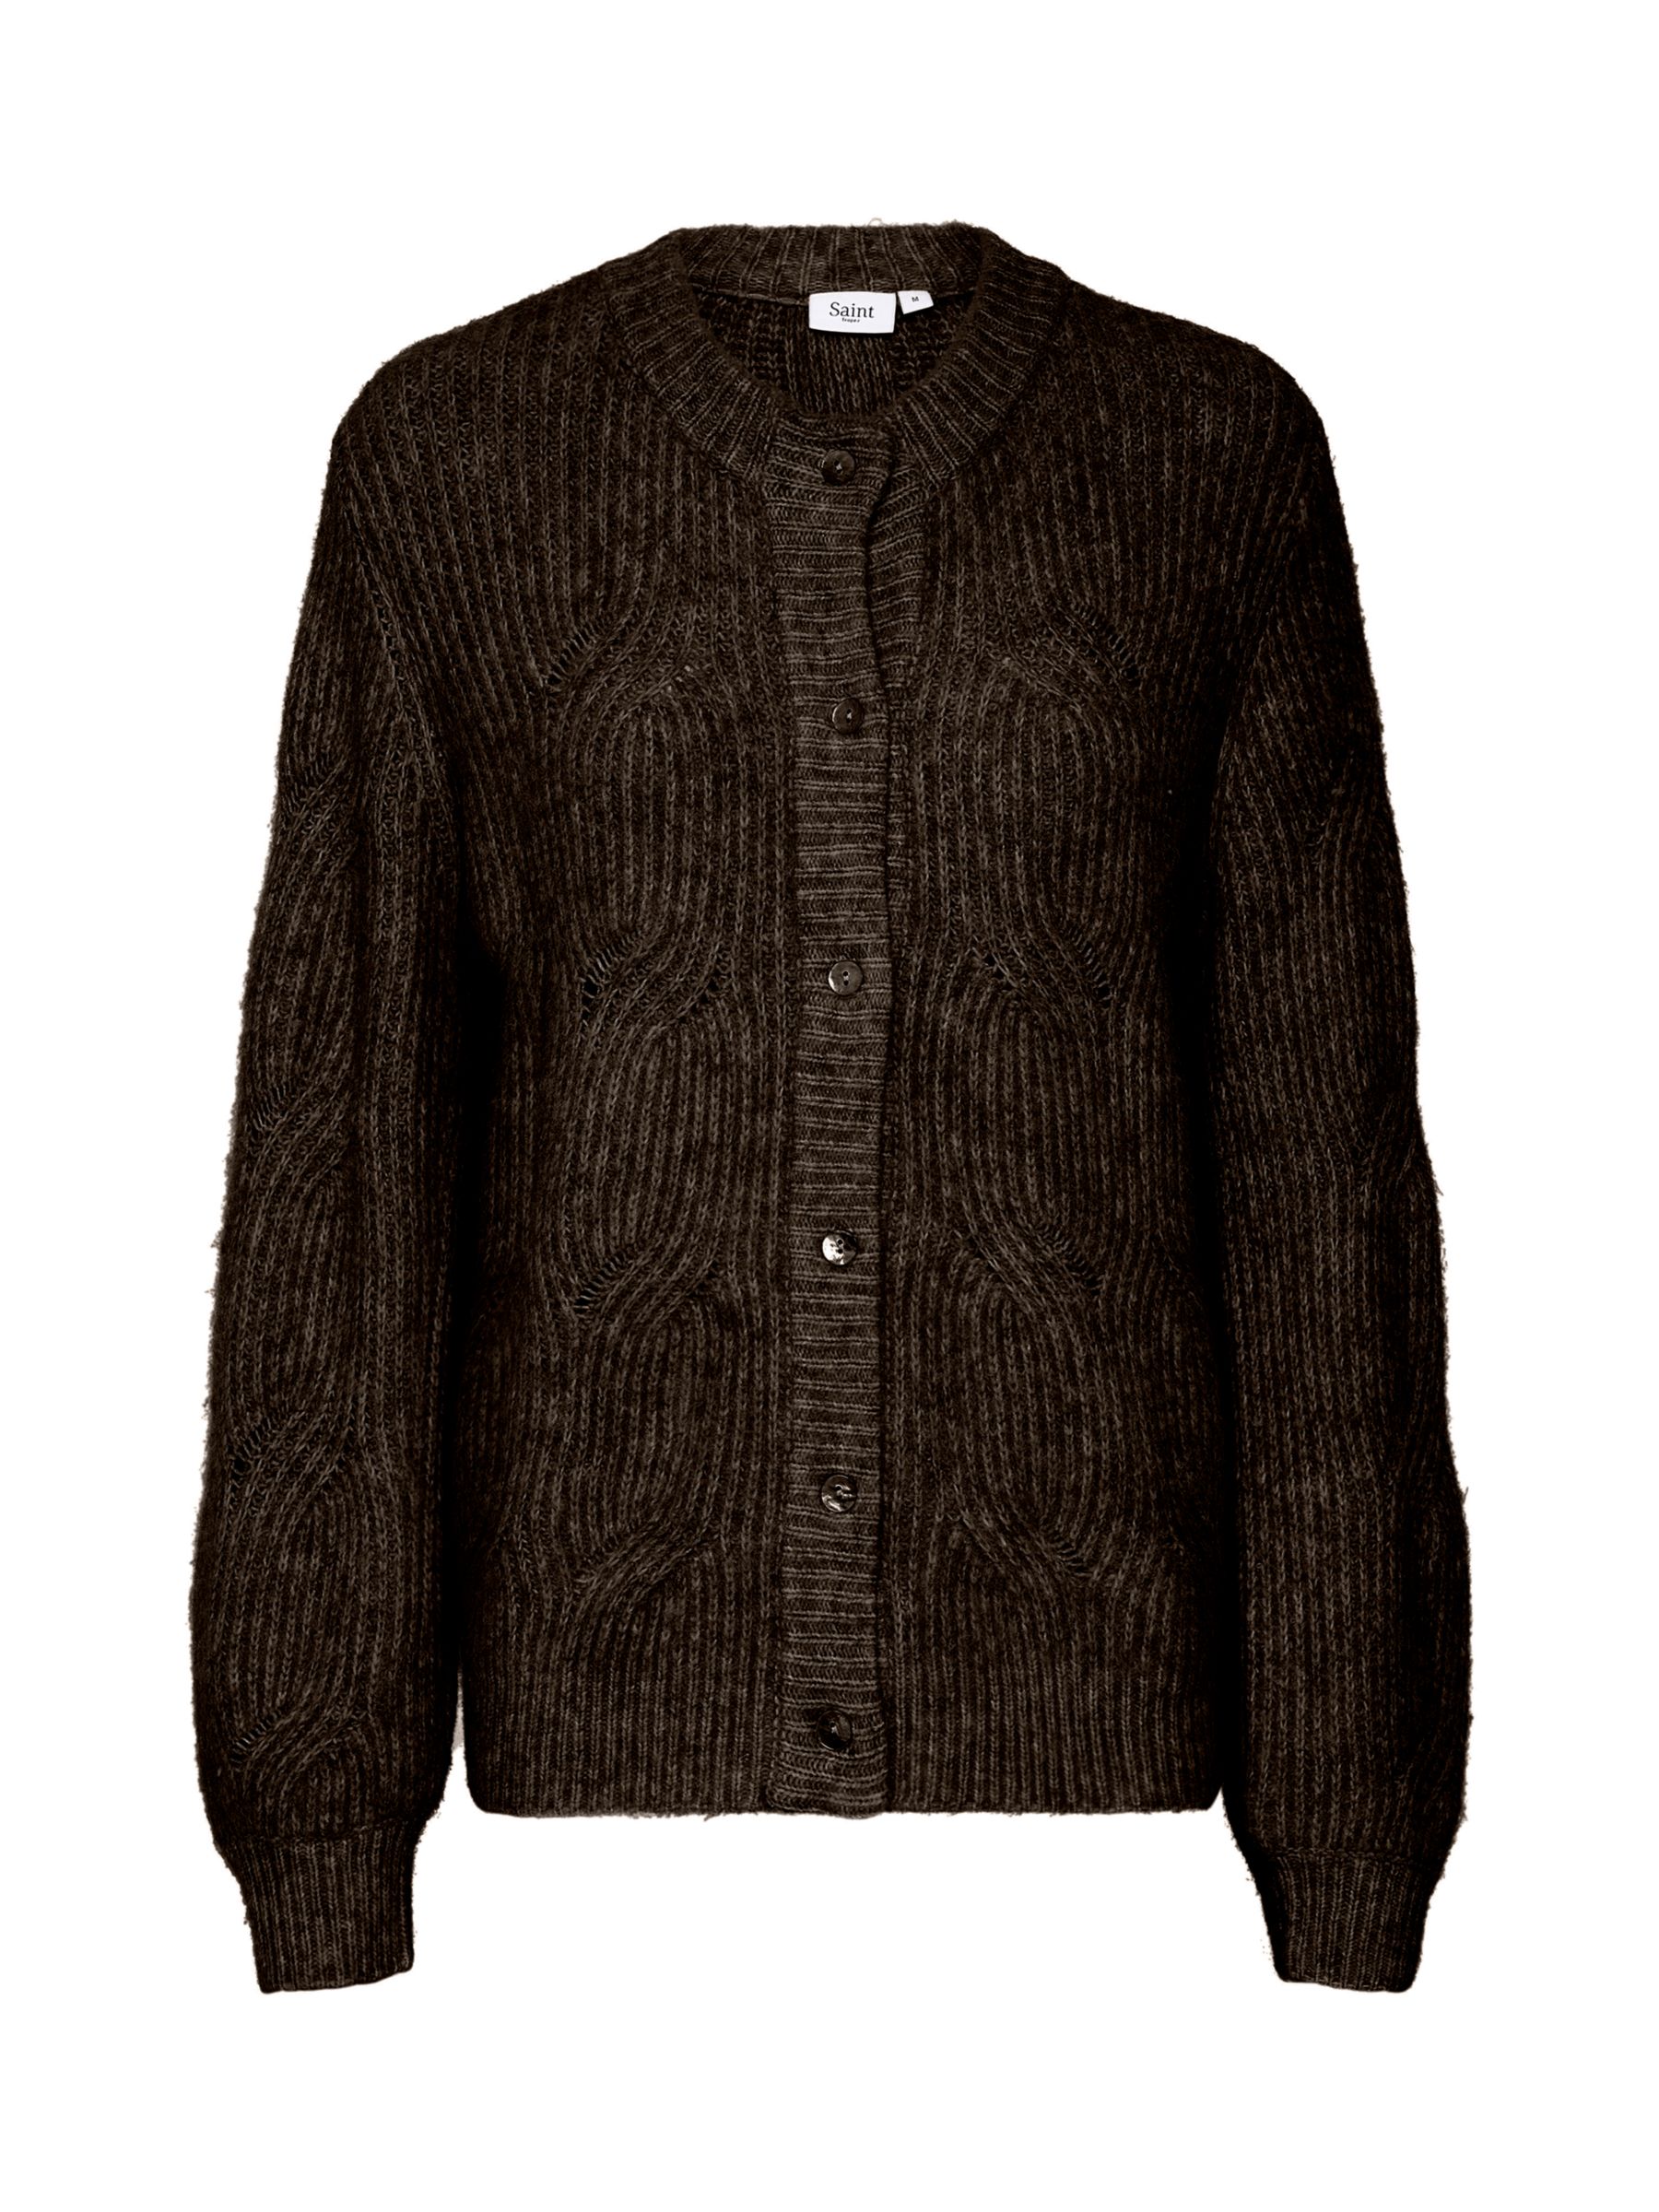 Saint Tropez Arabella Cable Knit Button Cardigan, Chocolate Brown at ...